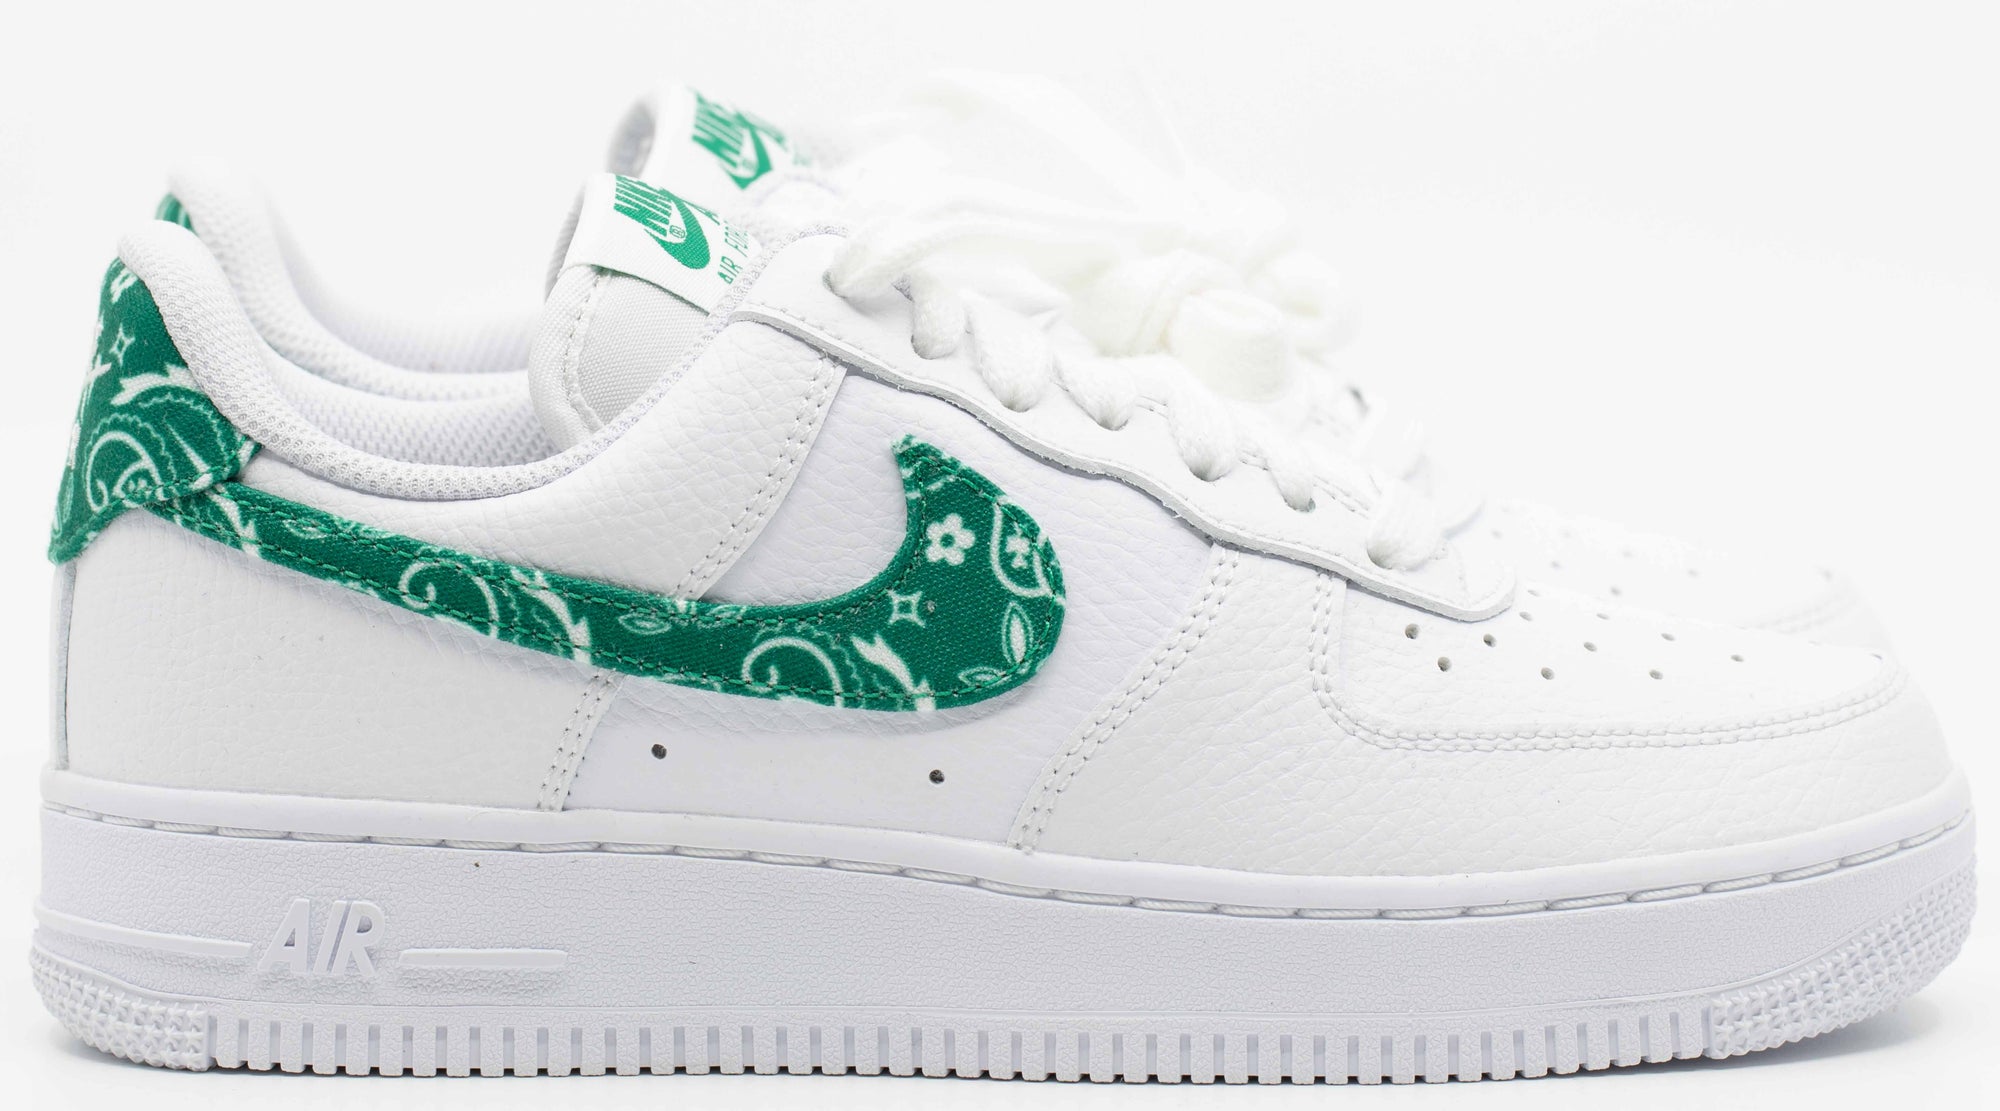 Nike Air Force 1 Low '07 Essential White "Green Paisley" (W)